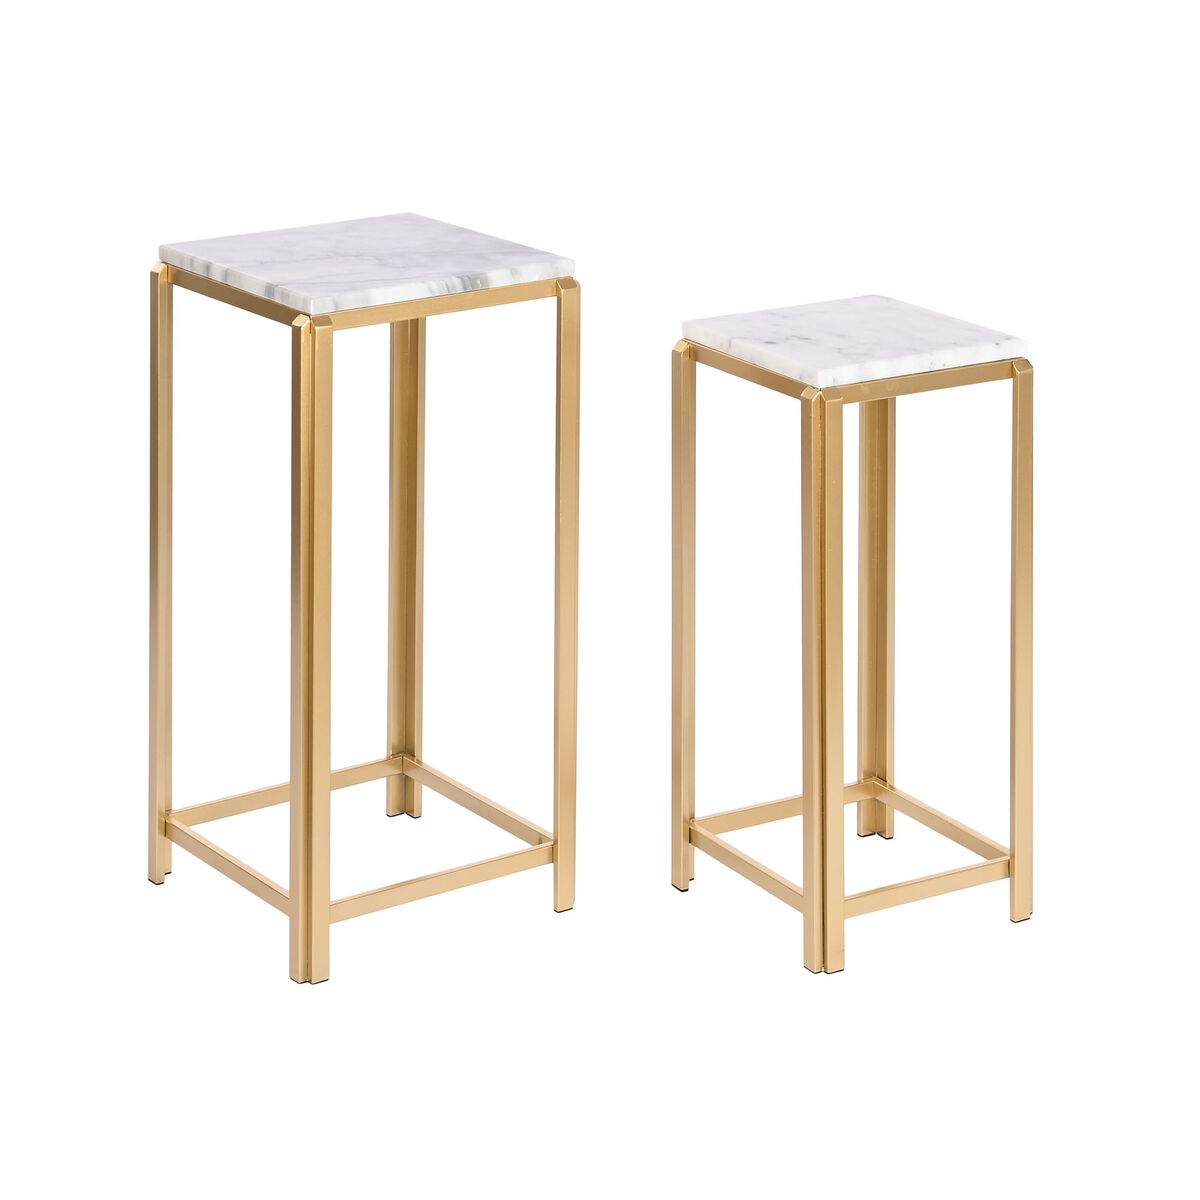 Set of 2 tables DKD Home Decor 33 x 33 x 70 cm Golden Metal White Marble